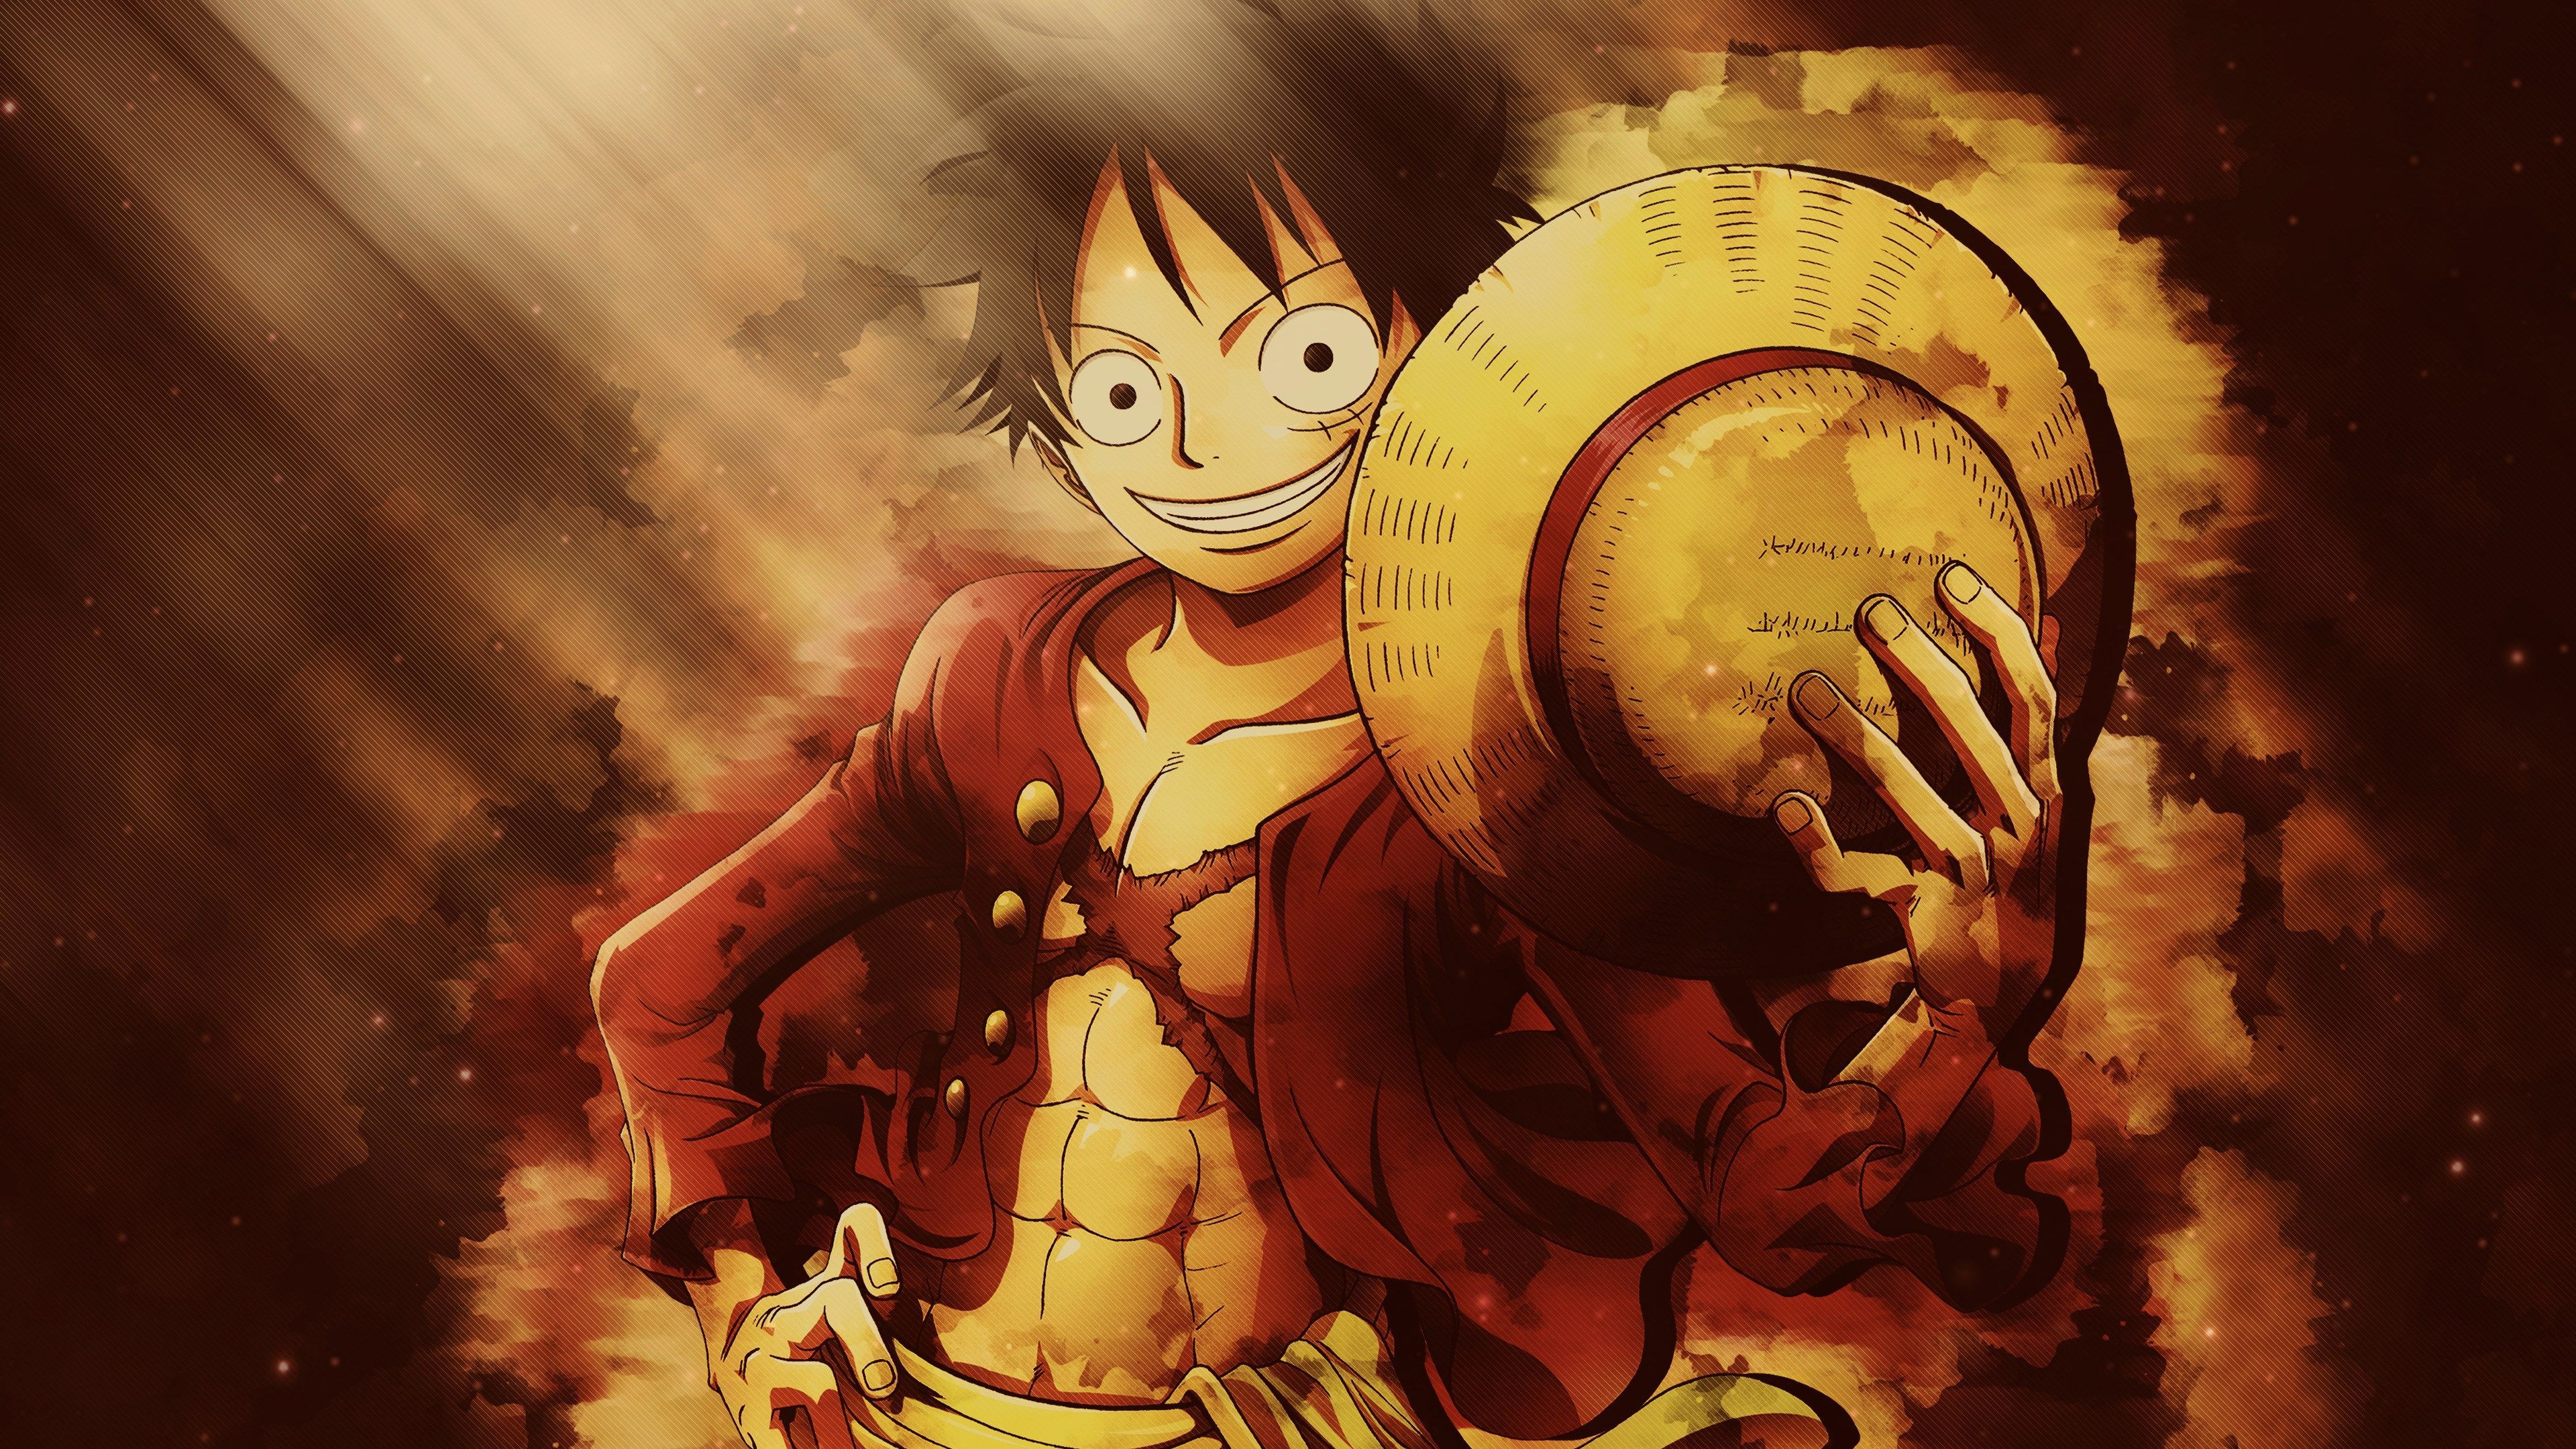 Luffy 4K wallpaper for your desktop or mobile screen free and easy to download